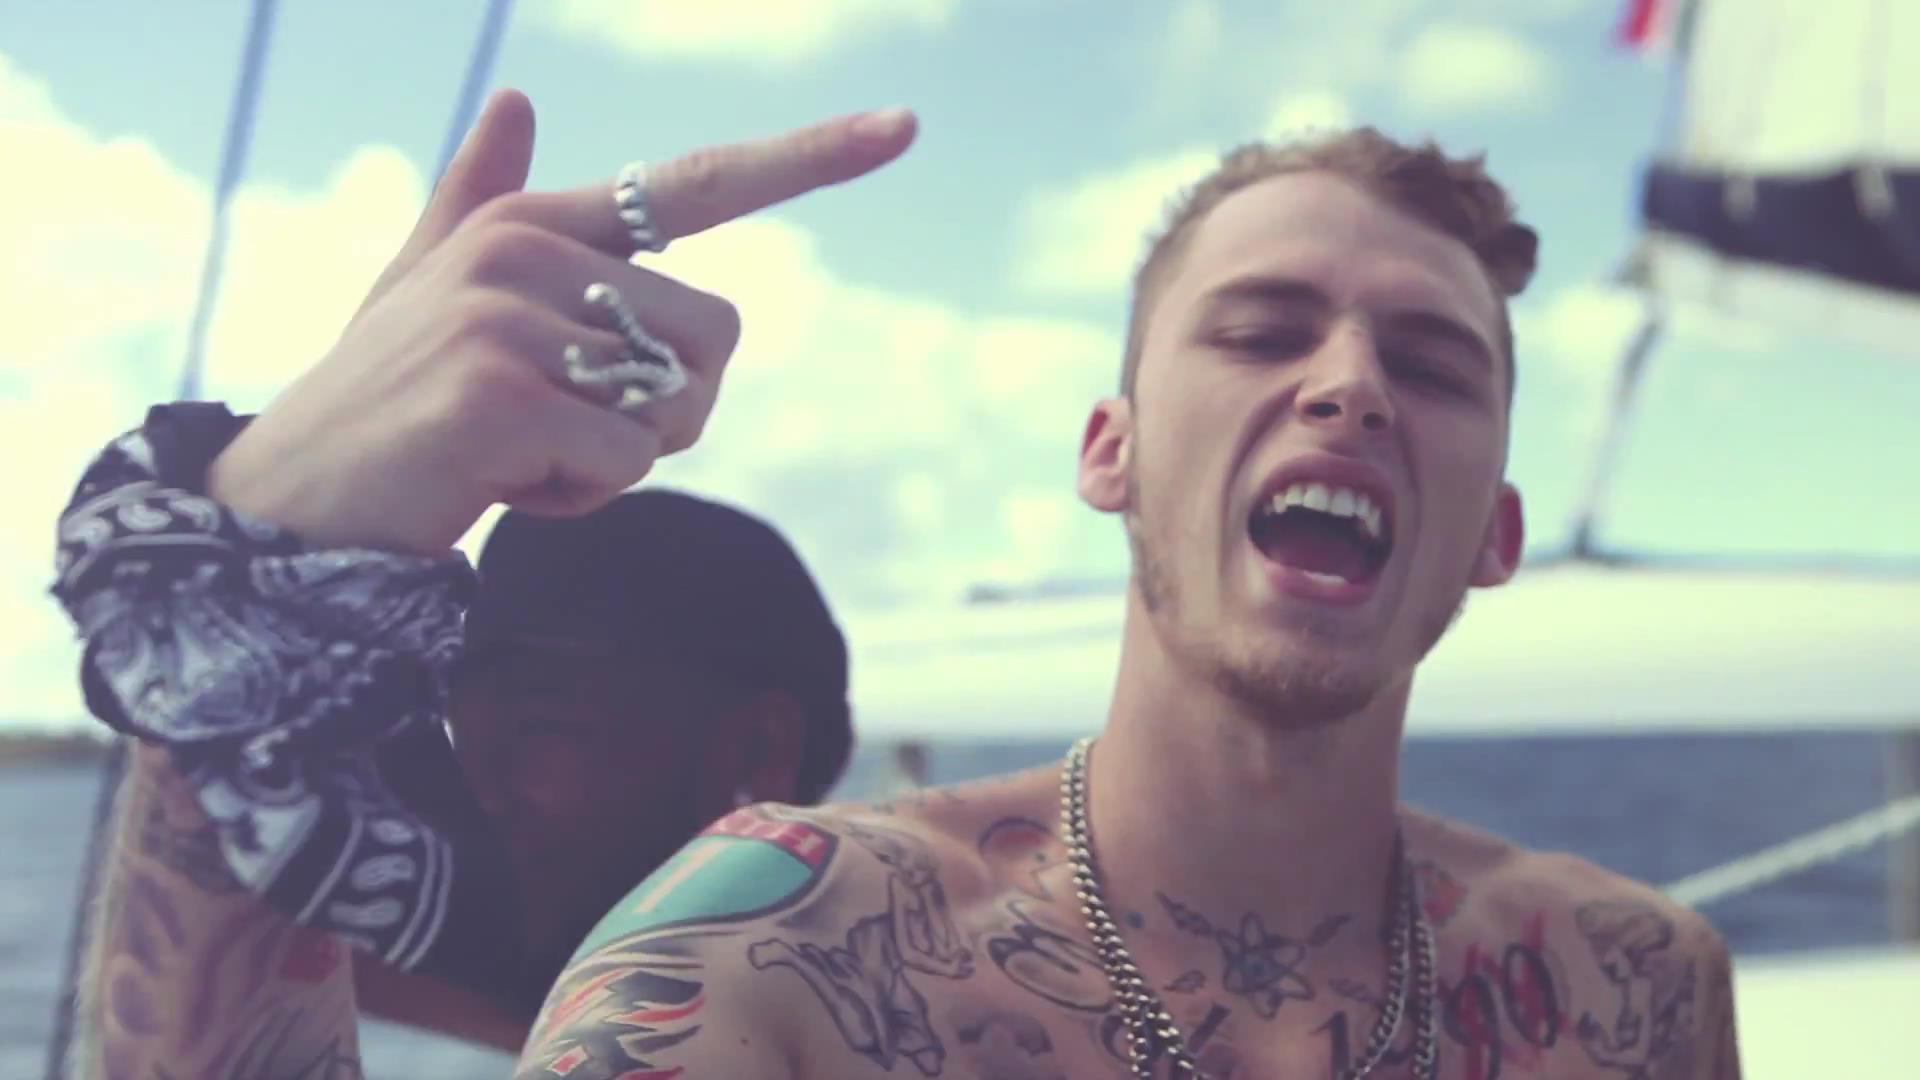 mgk Archives